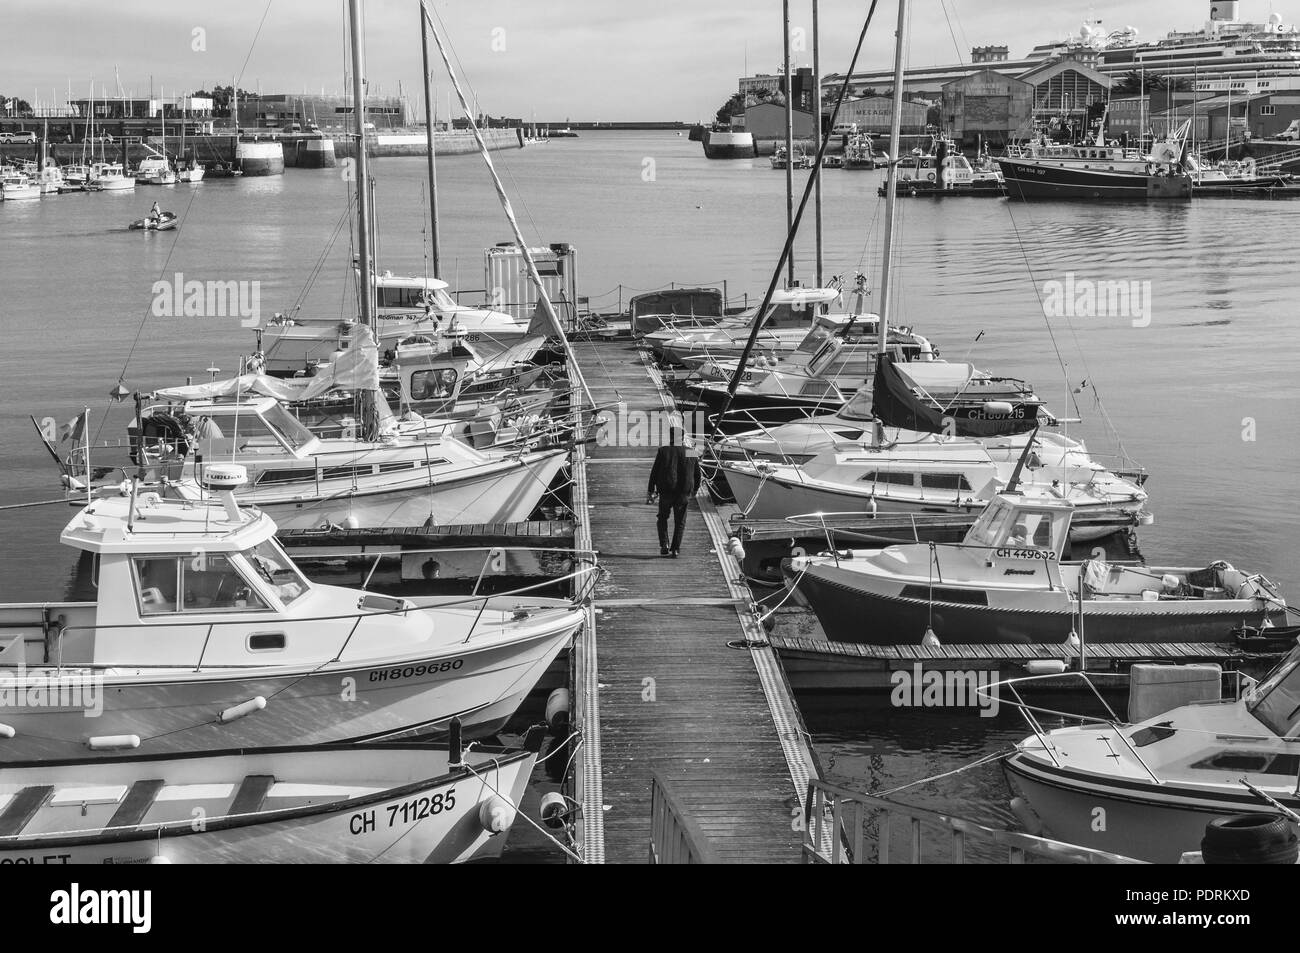 Cherbourg, France - May 22, 2017: Boats moored in the port of Cherbourg-Octeville, Normandy, France. Black and white photography. Stock Photo